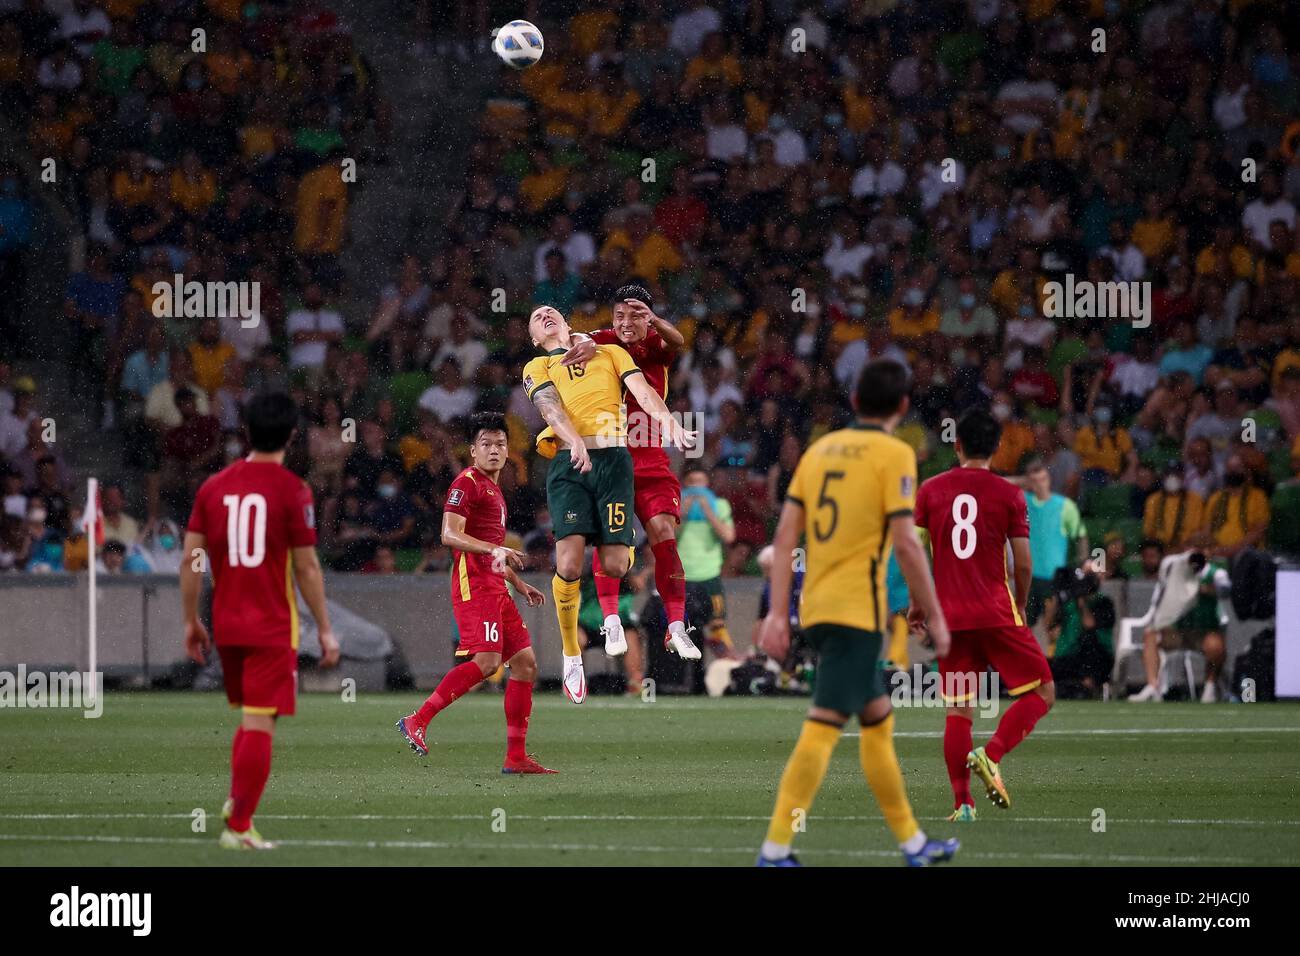 Melbourne, Australia, 27 January, 2022. Mitchell Duke of the Australian Socceroos heads the ball during the World Cup Qualifier football match between Australia Socceroos and Vietnam on January 27, 2022 at AAMI Park in Melbourne, Australia. Credit: Dave Hewison/Speed Media/Alamy Live News Stock Photo